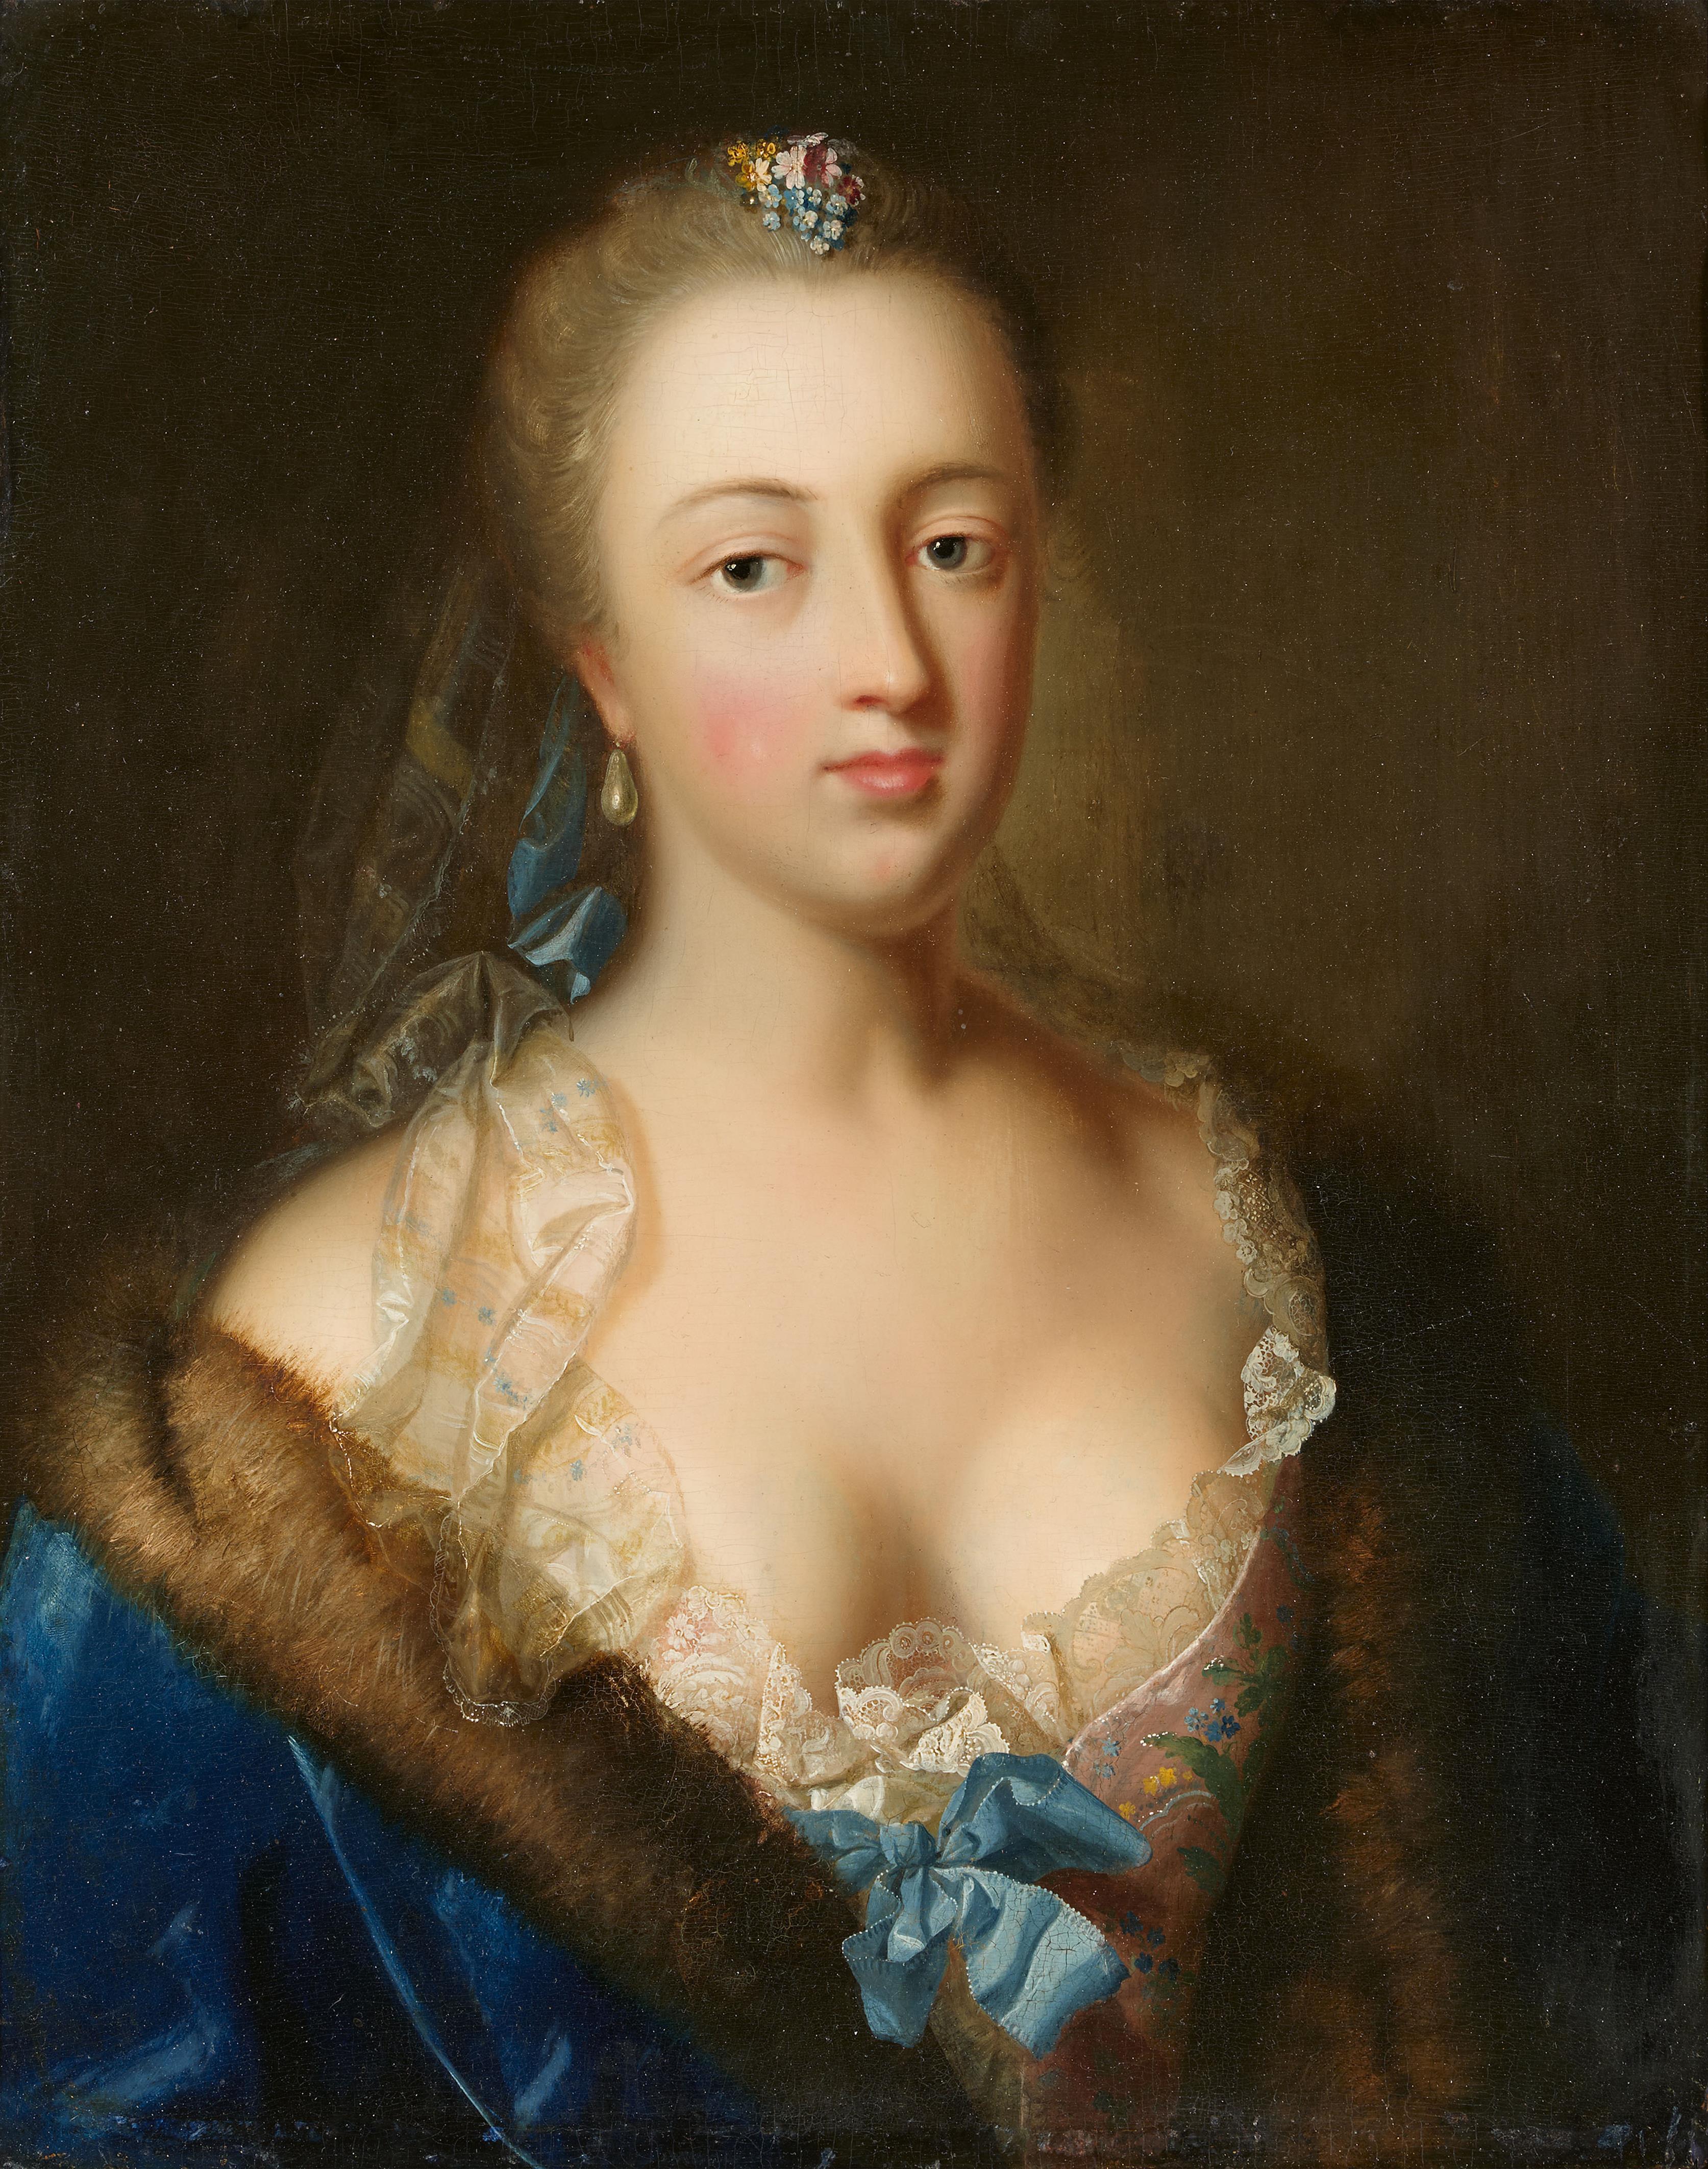 French School 18th century - Portrait of a Lady - image-1